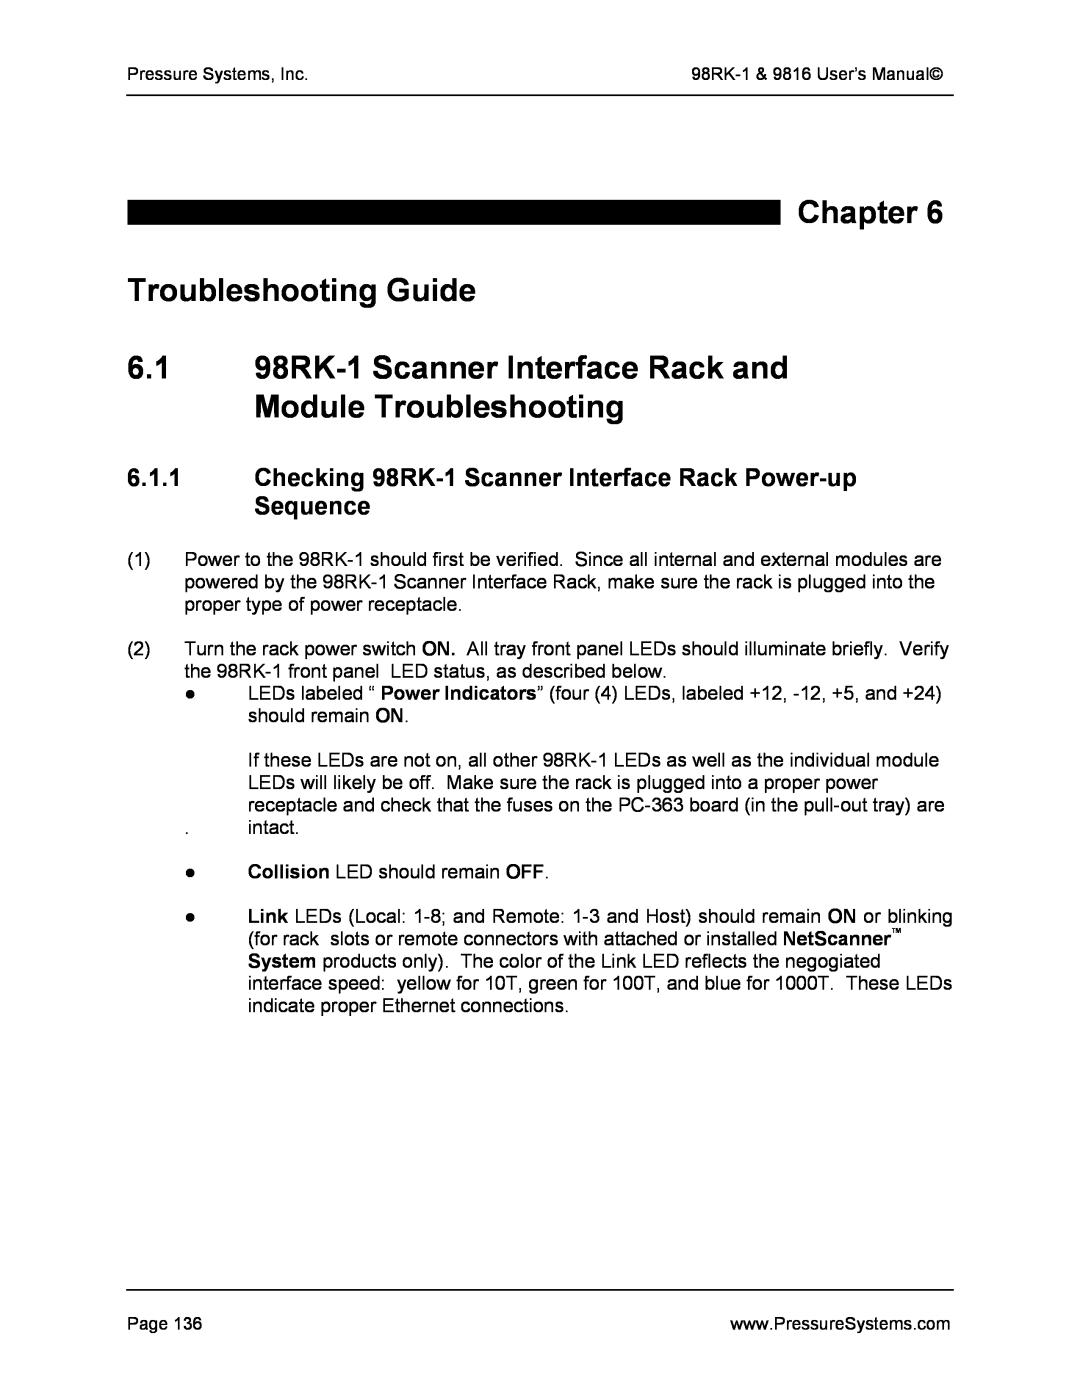 Pressure Systems user manual Chapter Troubleshooting Guide, 6.1 98RK-1 Scanner Interface Rack and Module Troubleshooting 